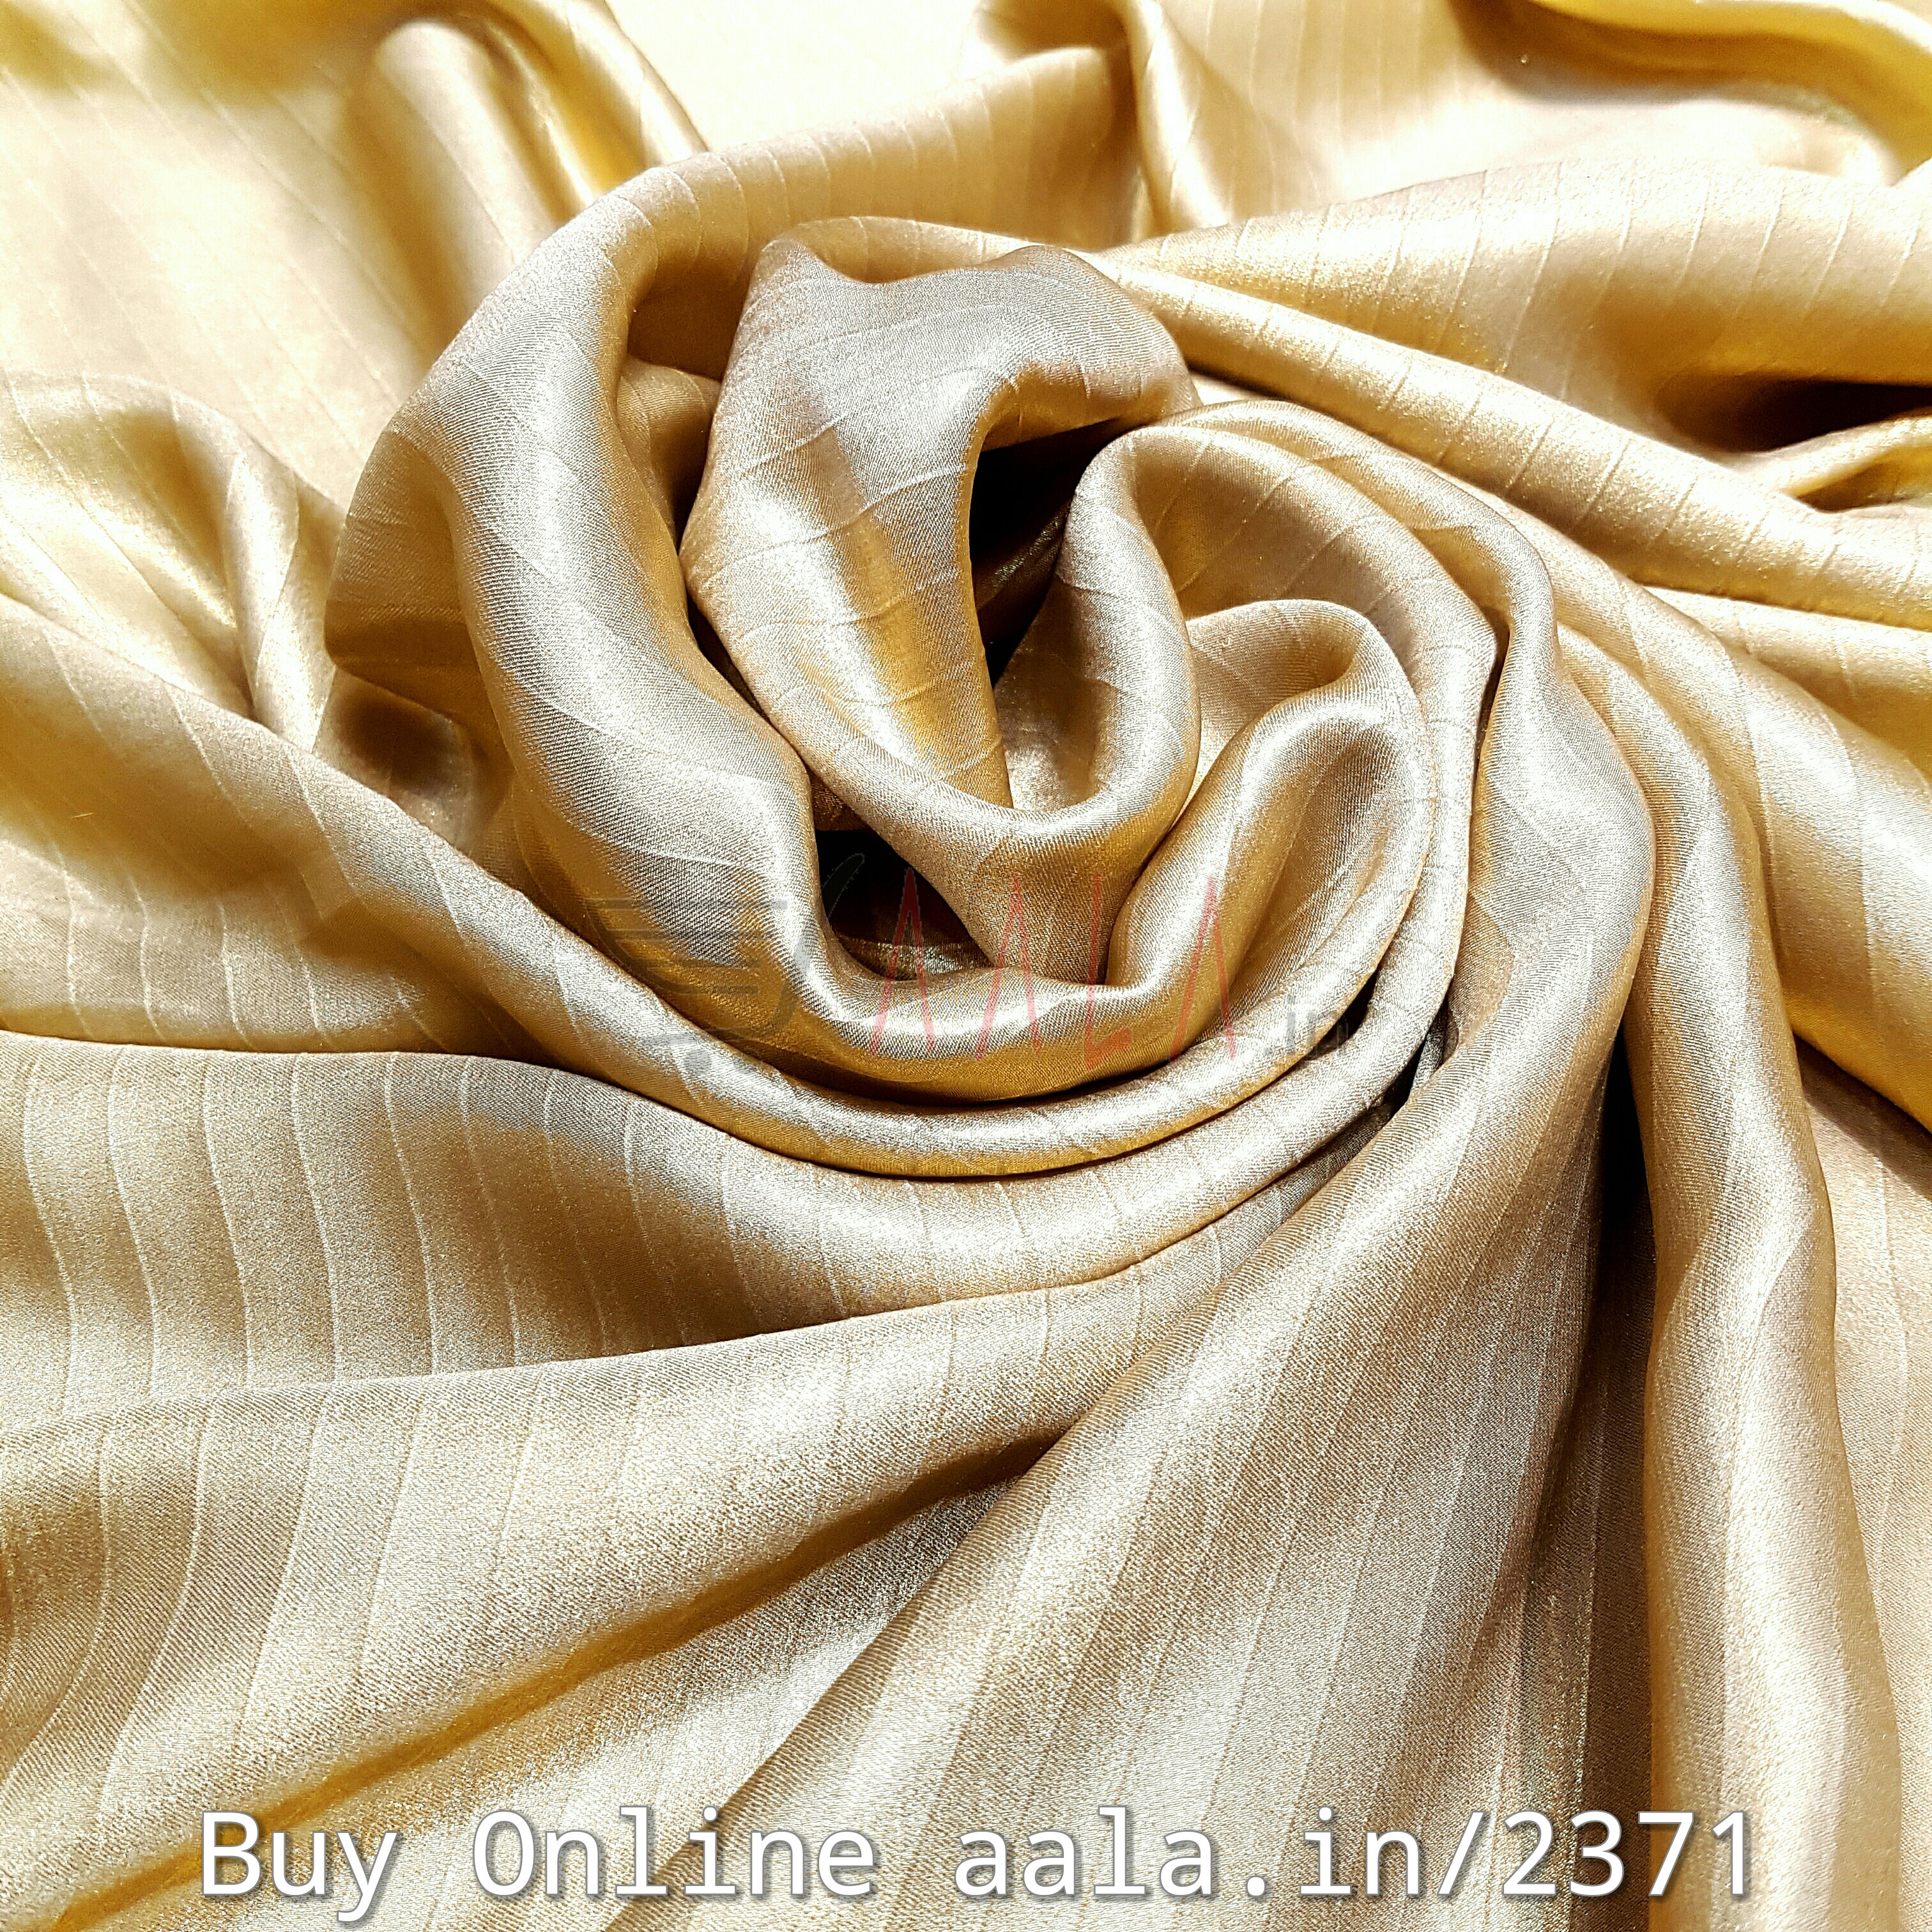 Foil Pleating Satin Georgette Poly-ester 44 Inches Dyed Per Metre #2371